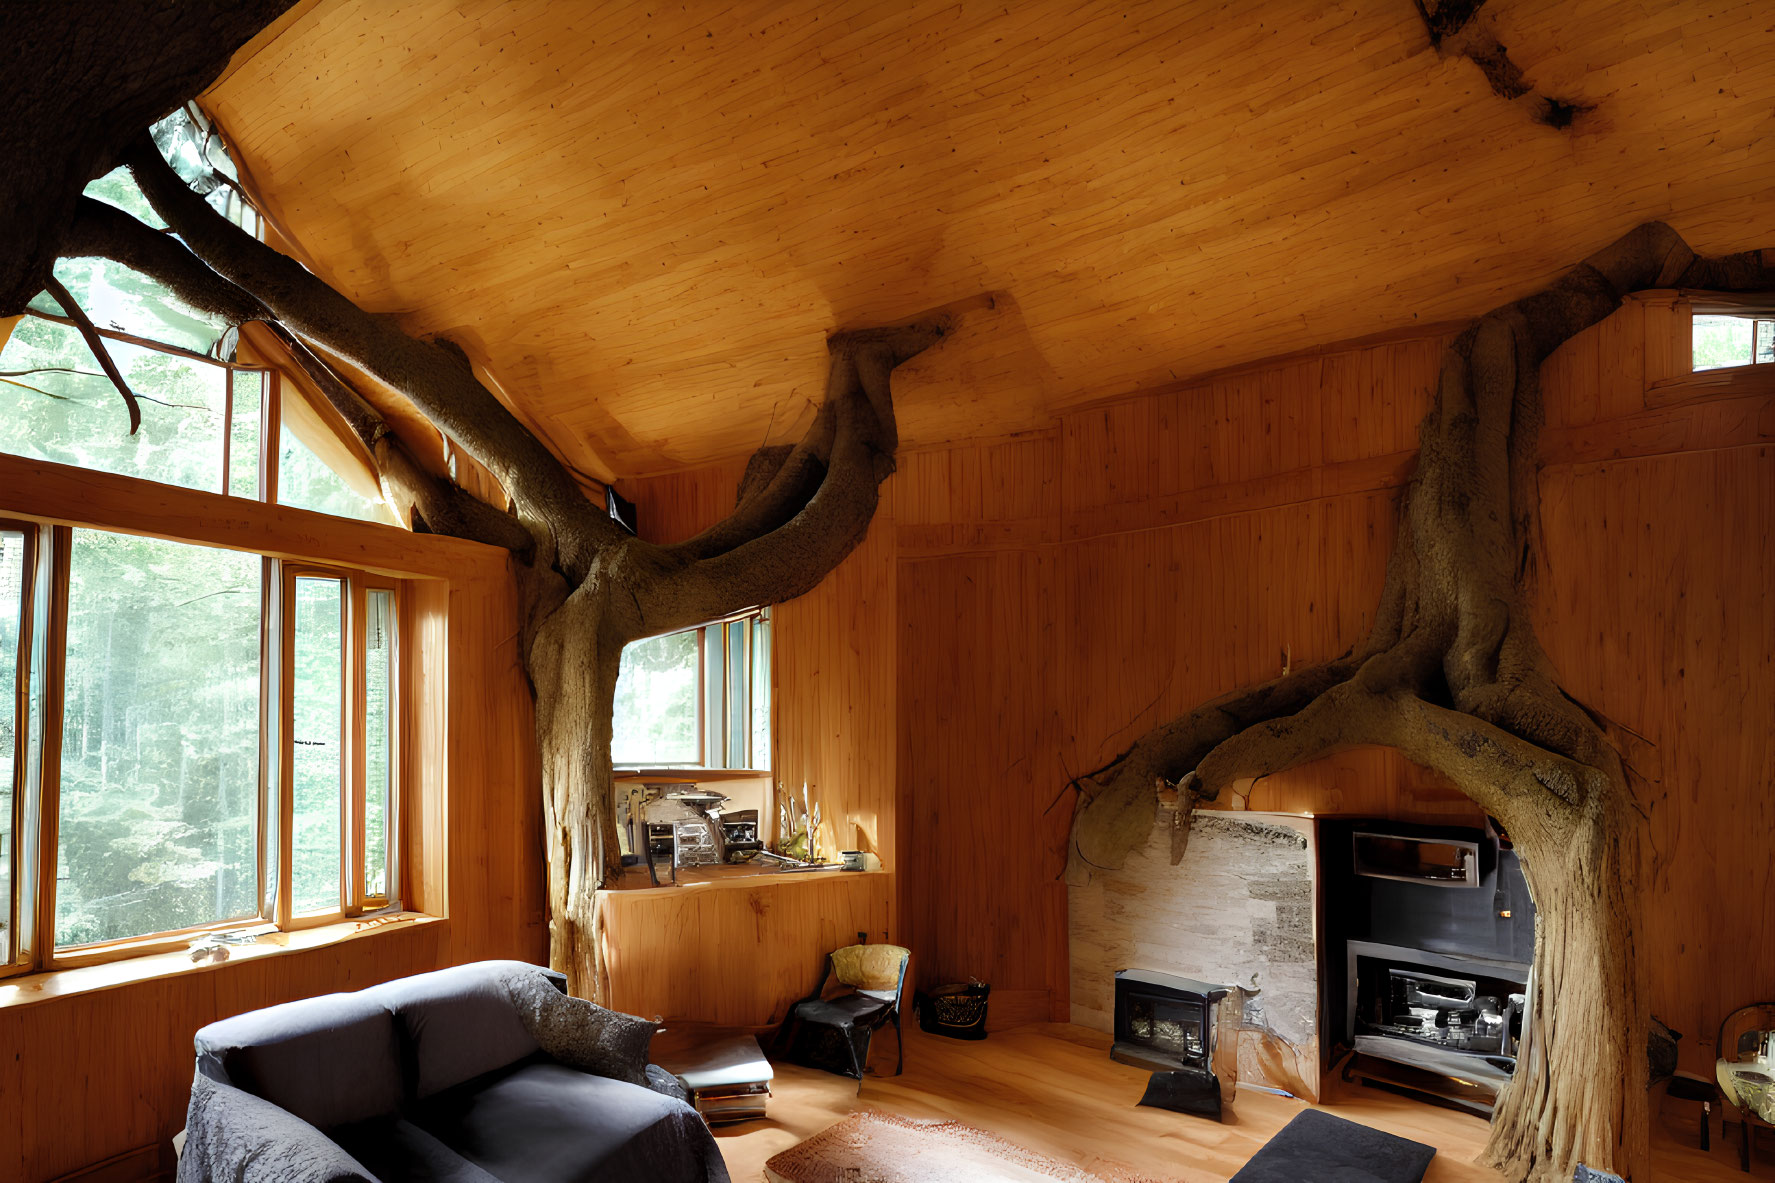 Rustic wooden interior with vaulted ceiling, tree branches, forest view, fireplace, and sofa